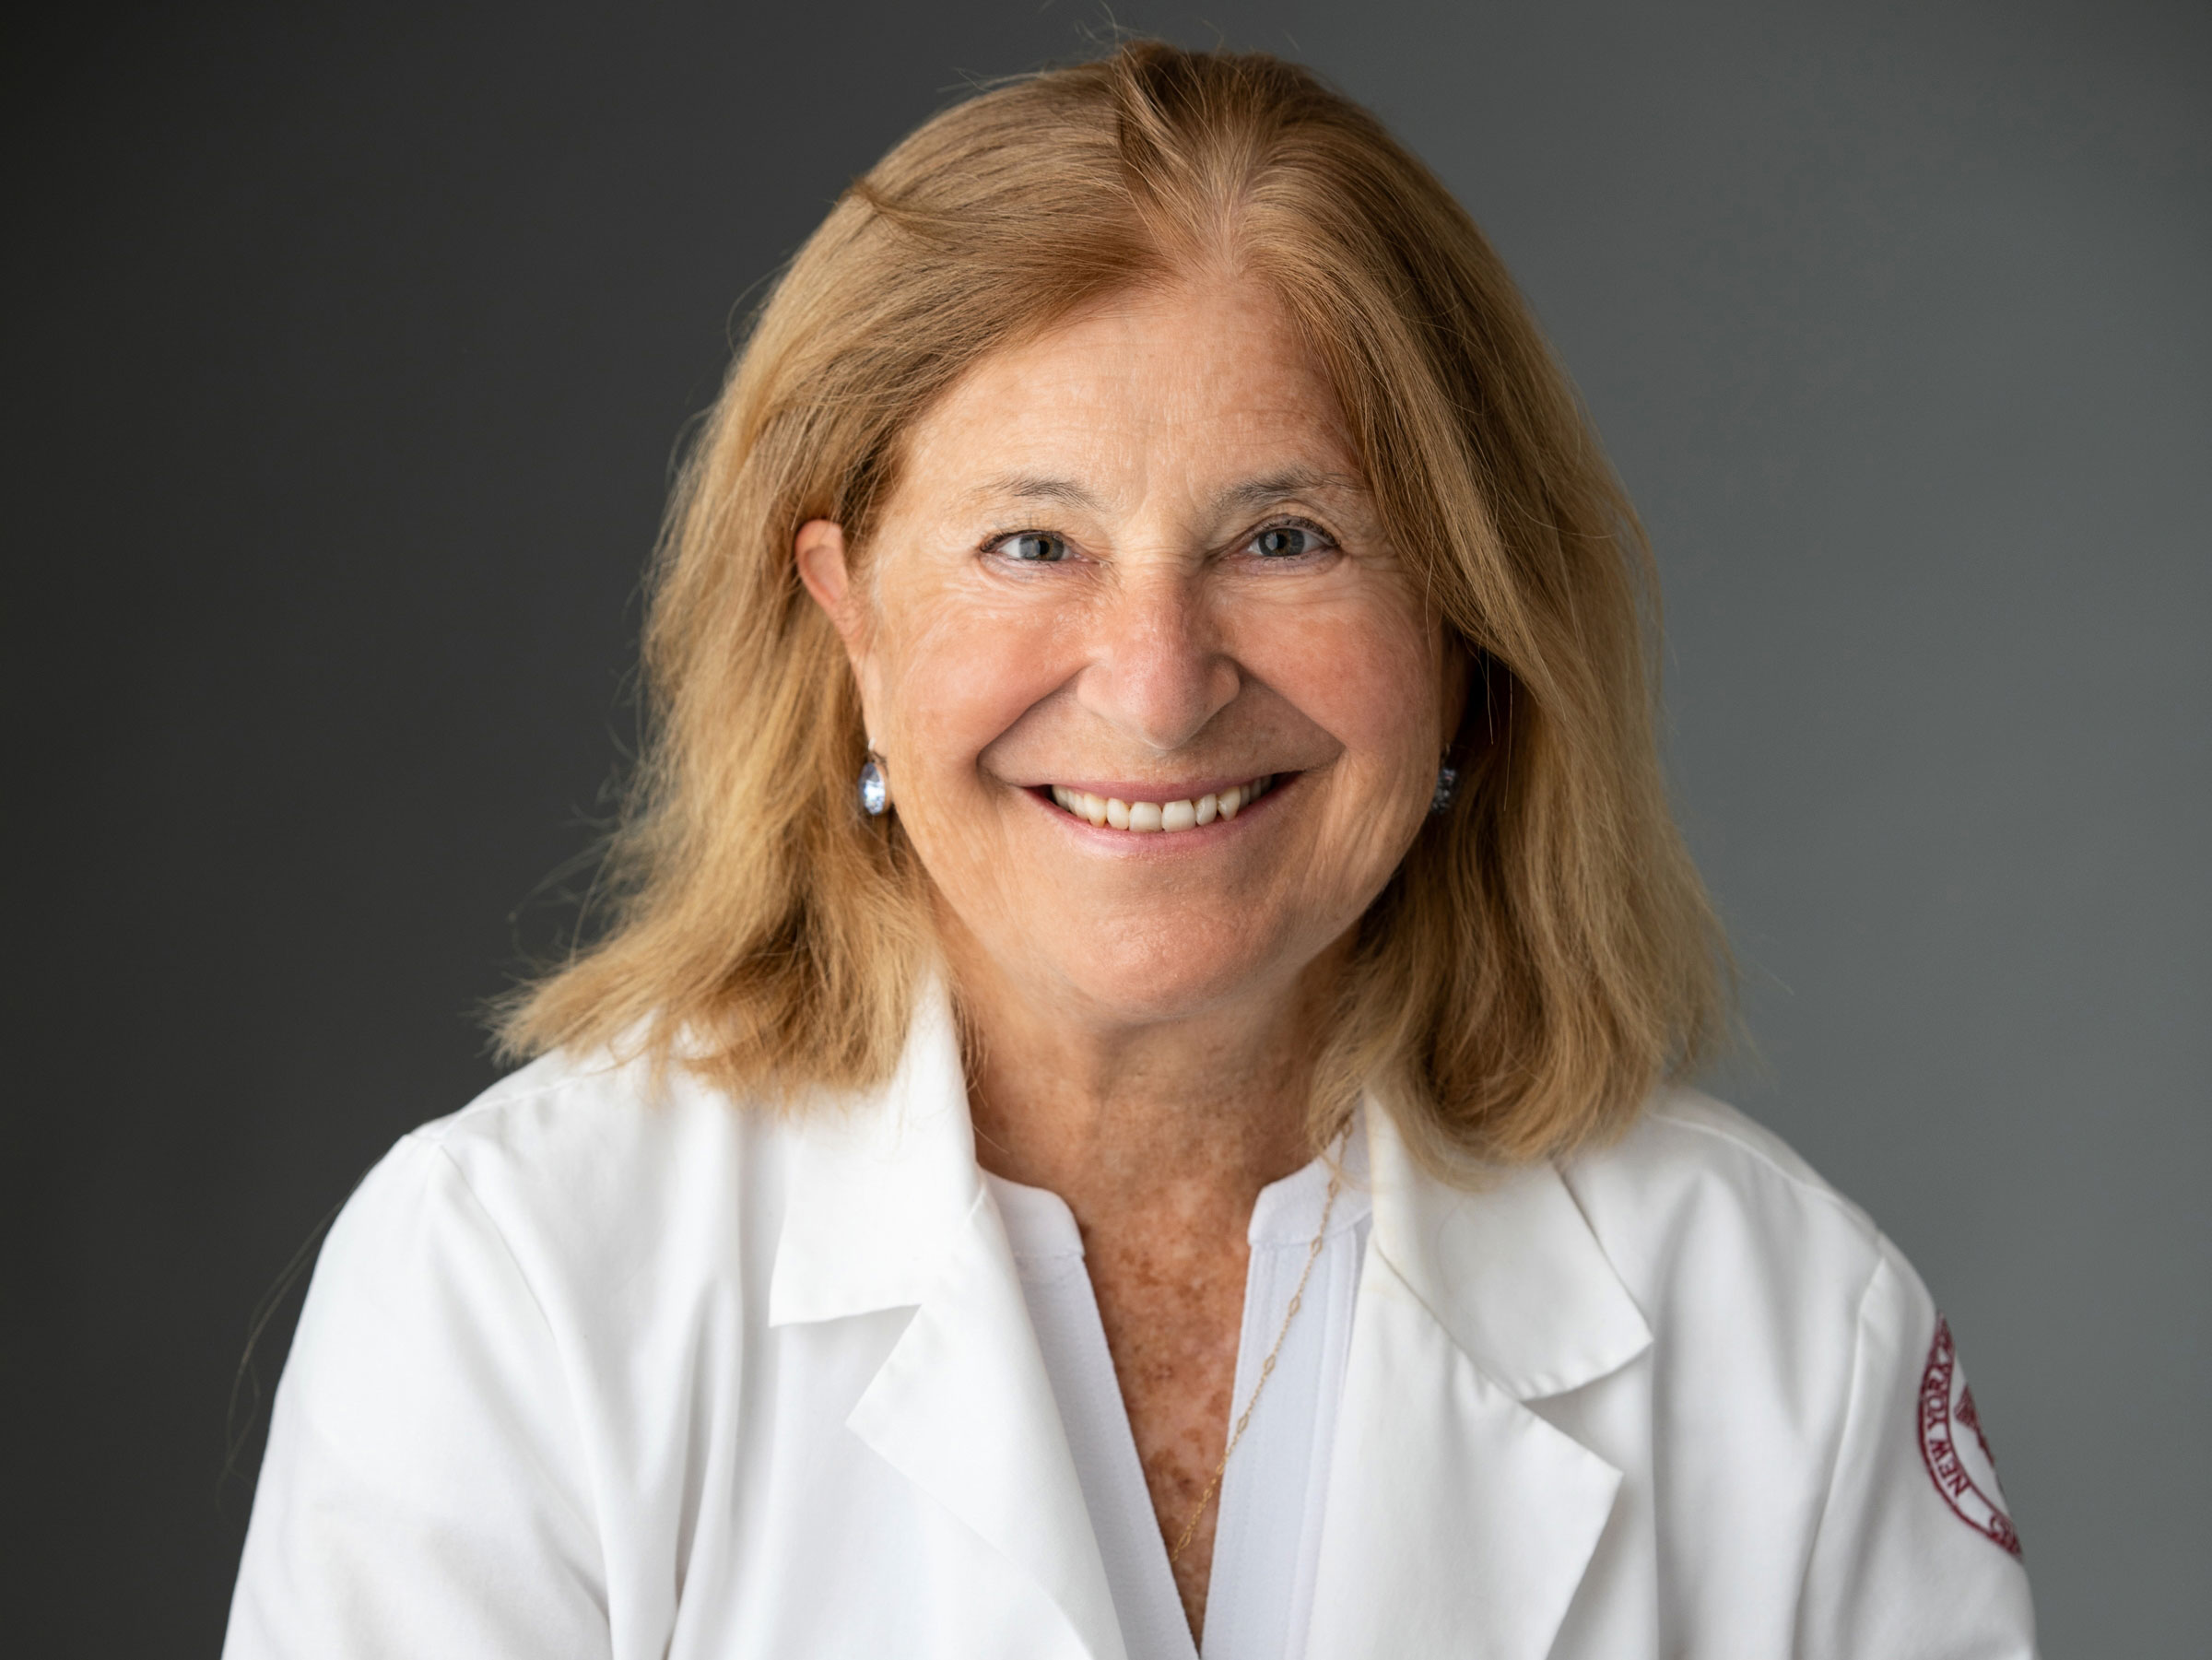 Female doctor smiling in front of a grey background with a white medical coat.